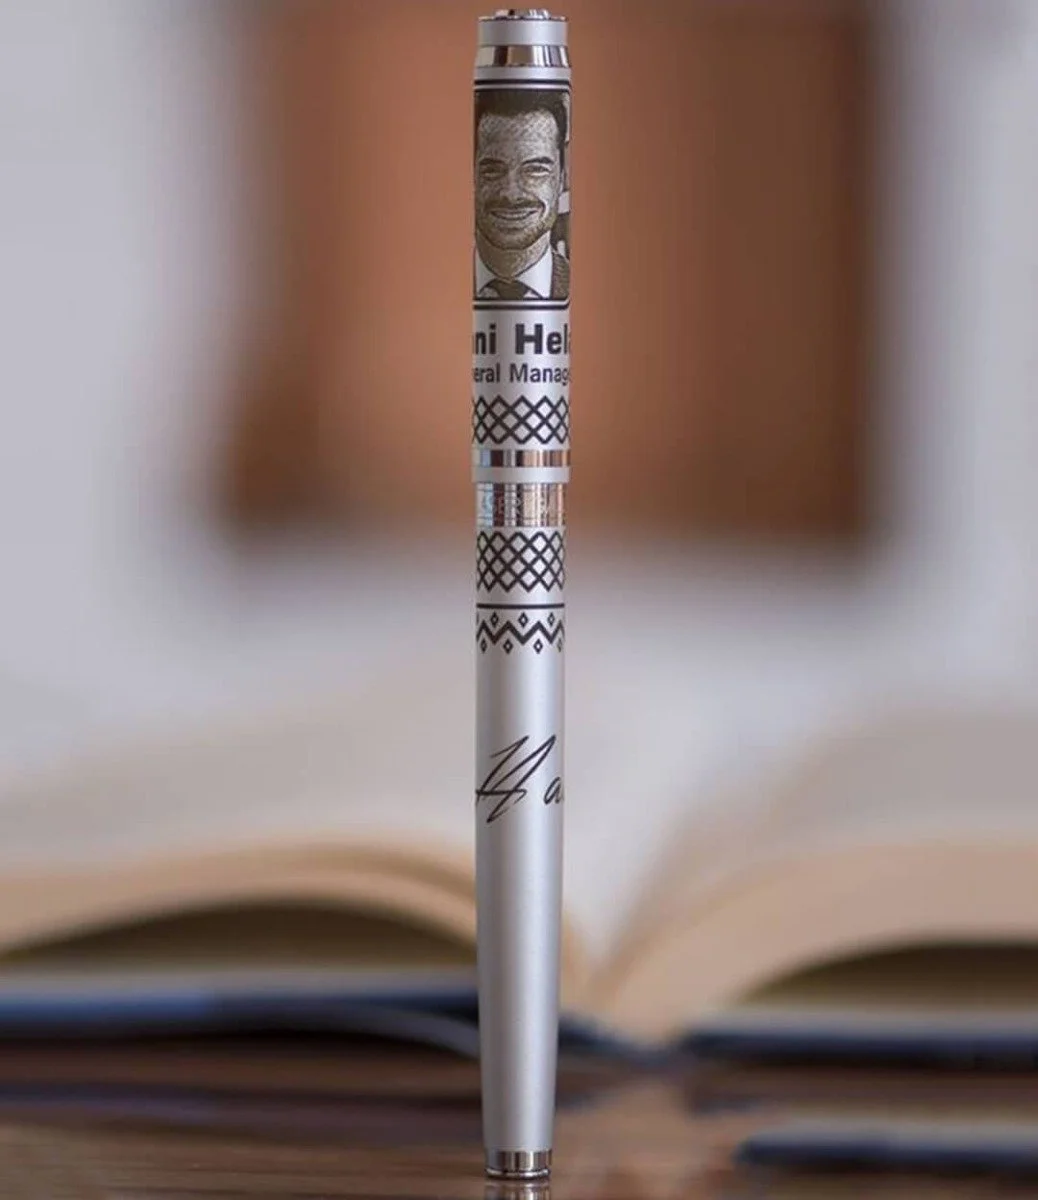 The only pen- 360 Degree With A Customized Name